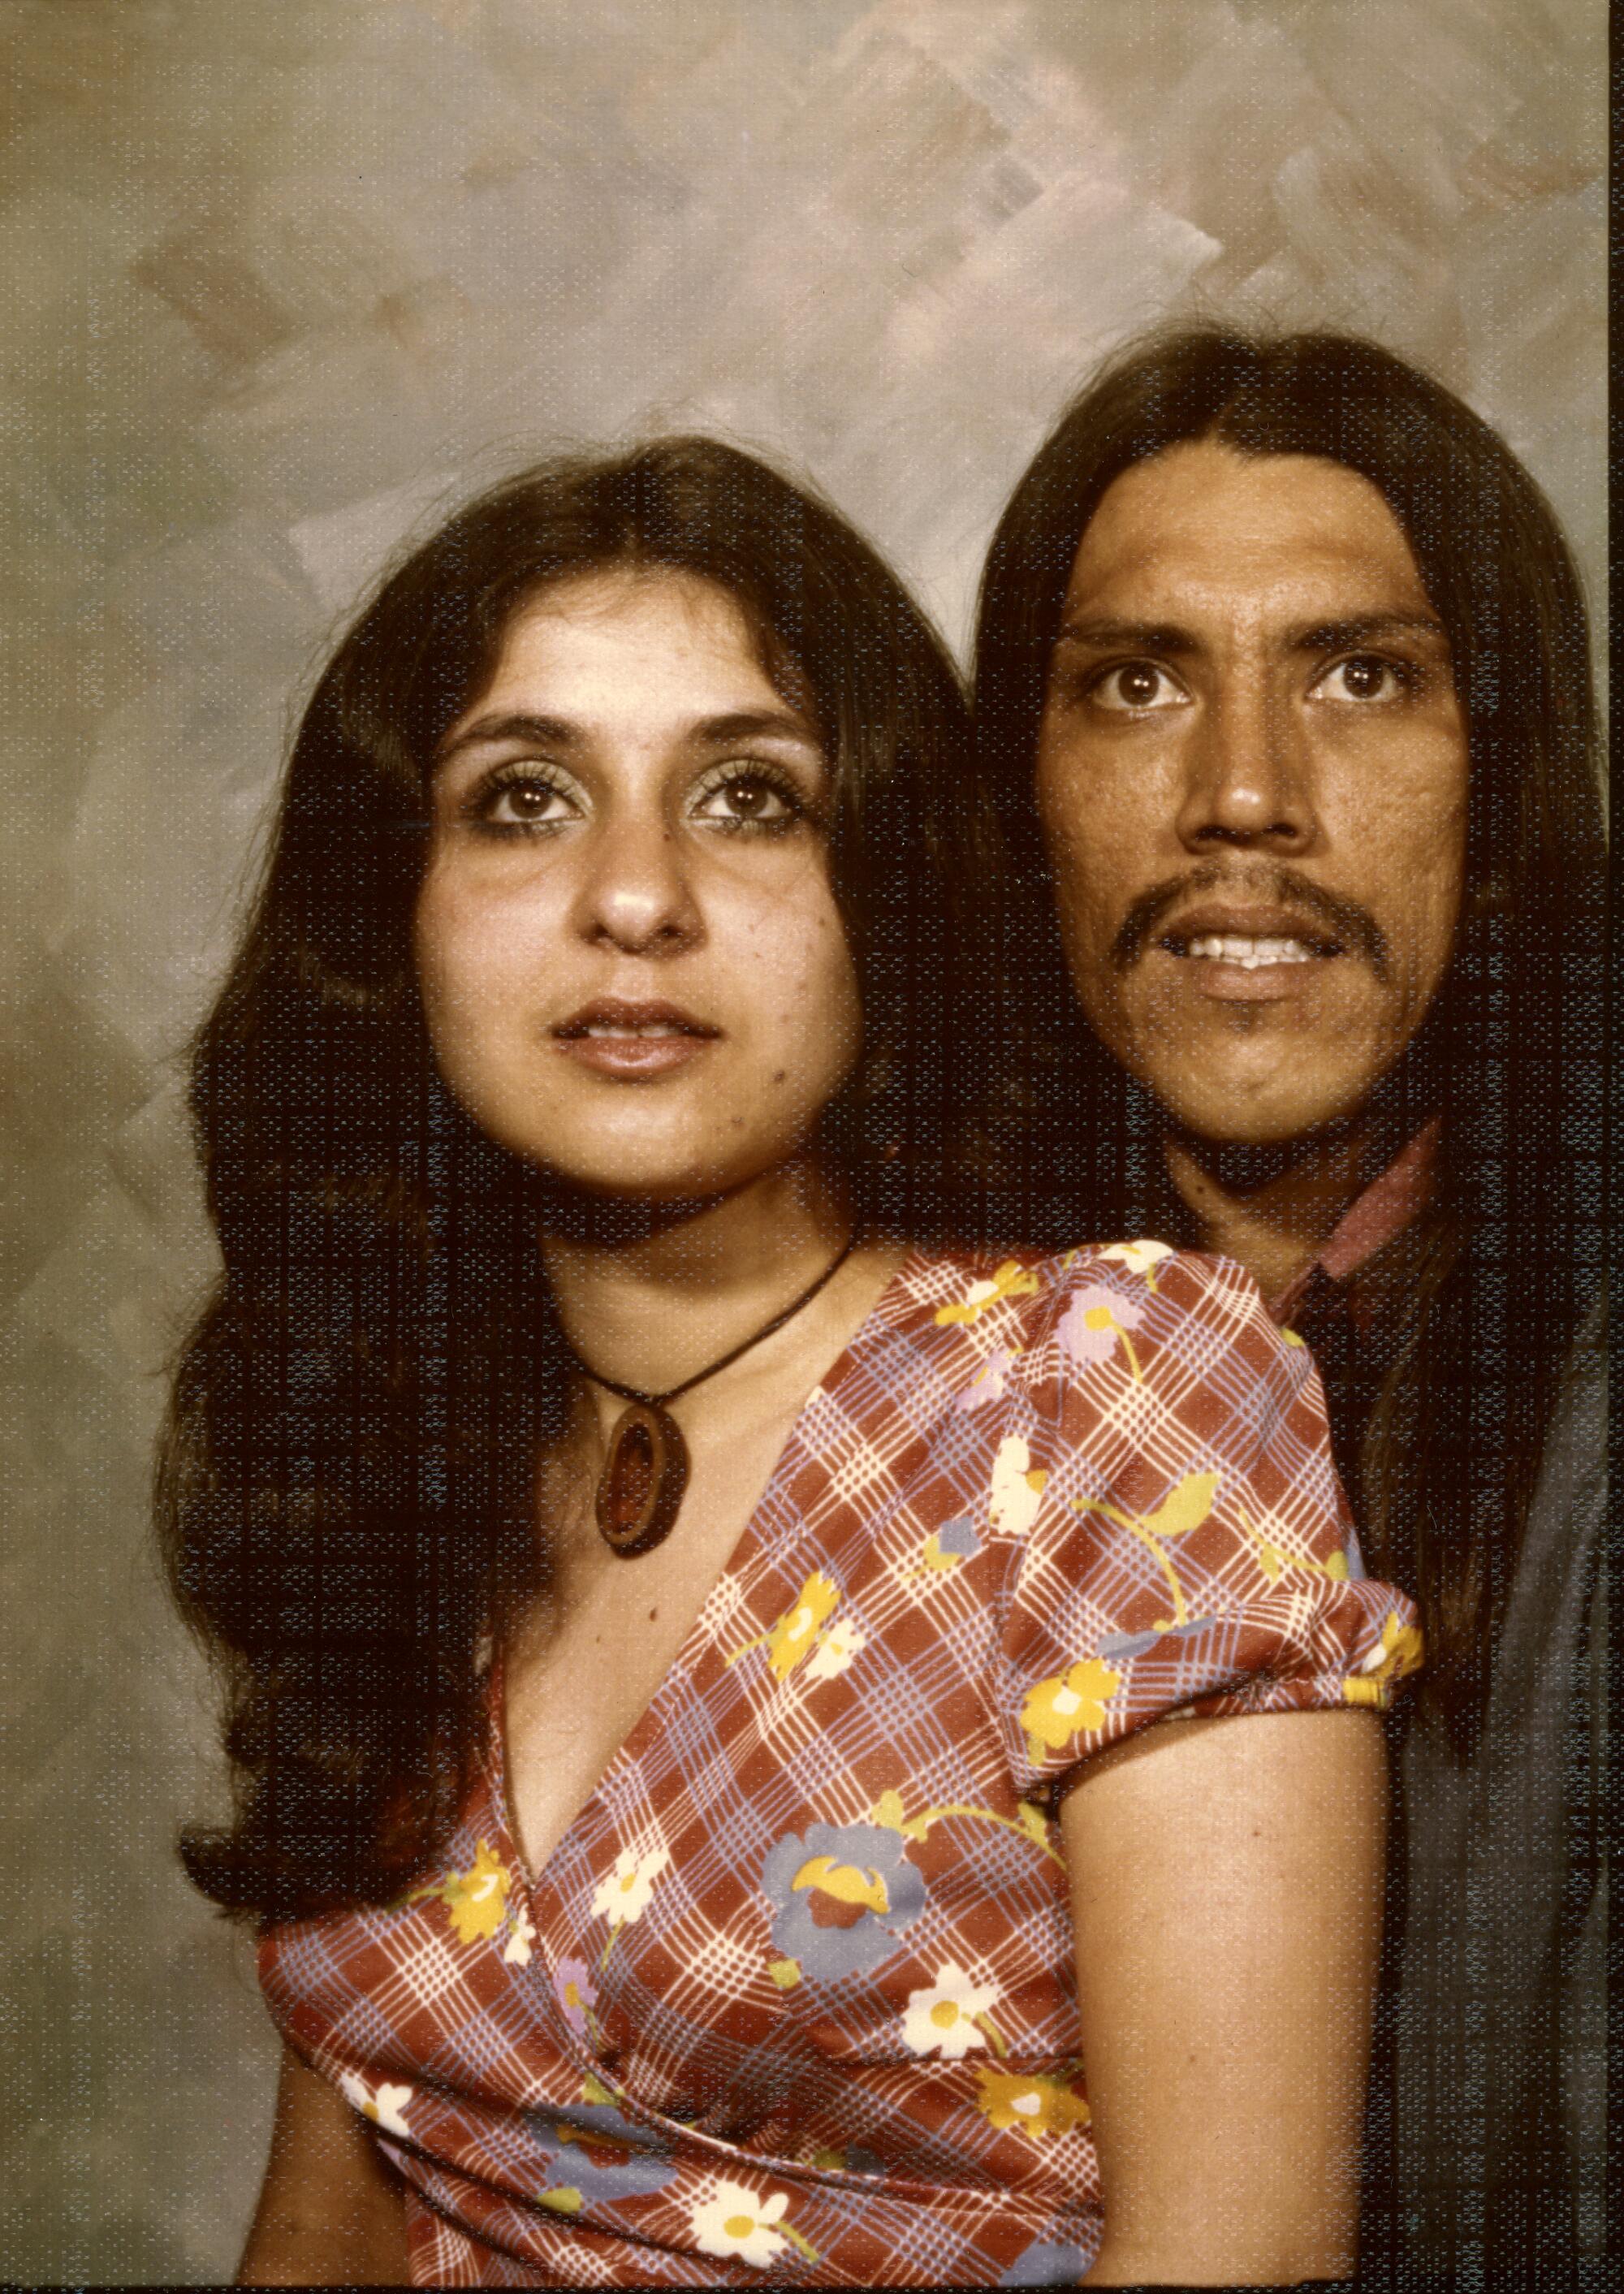 Danny Trejo and his wife in an old photo